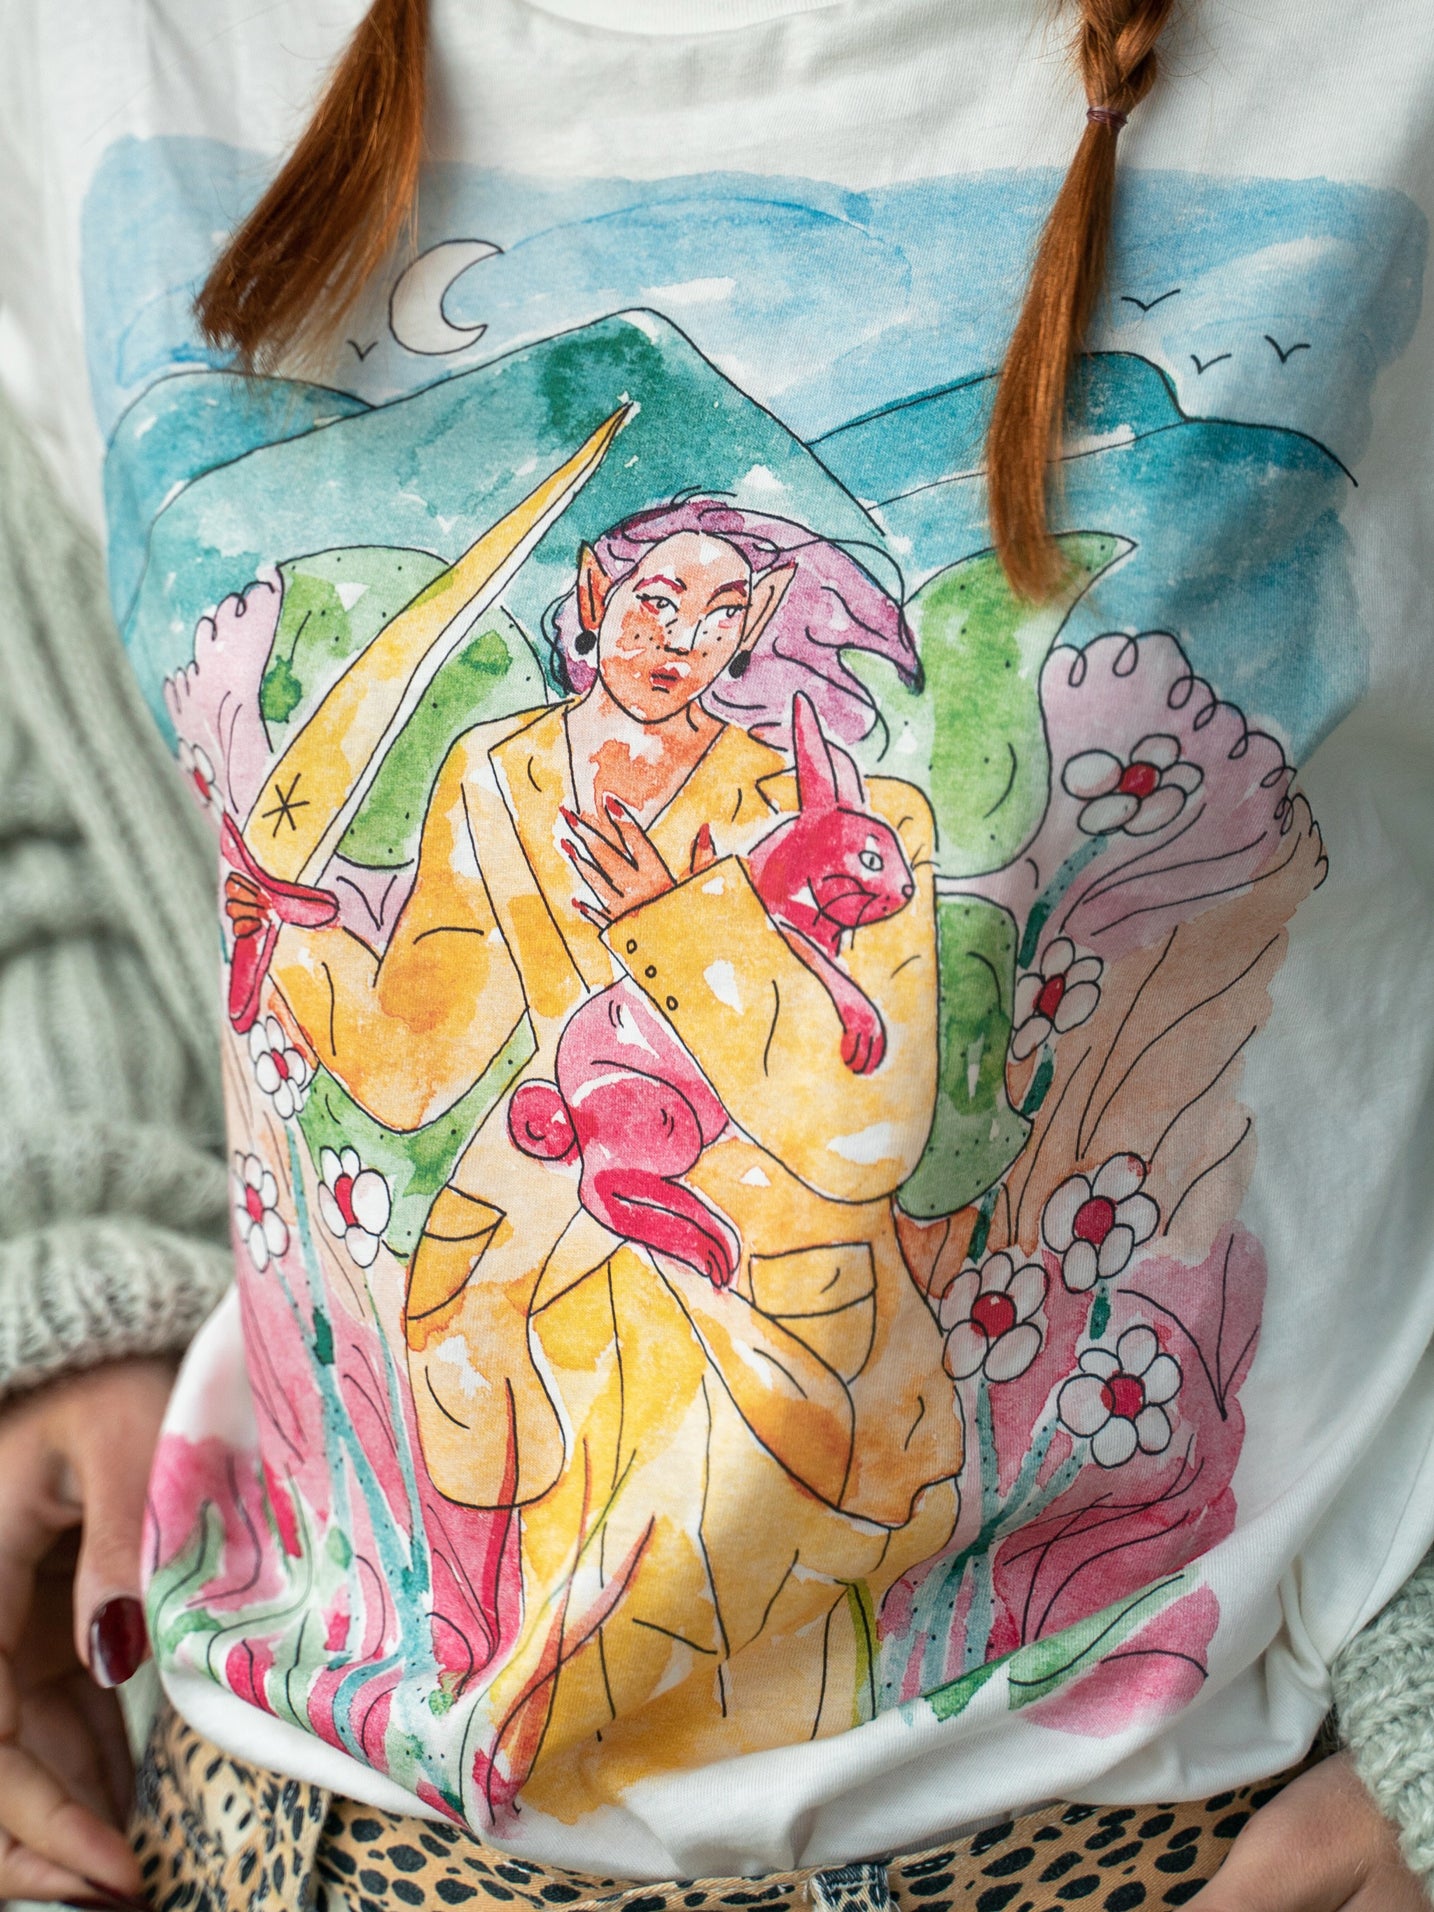 Women's short sleeve 100% cotton shirt featuring a woman warrior surrounded by highlands and nature, designed by Latino artist Ana Paula Machuca. Made in Peru